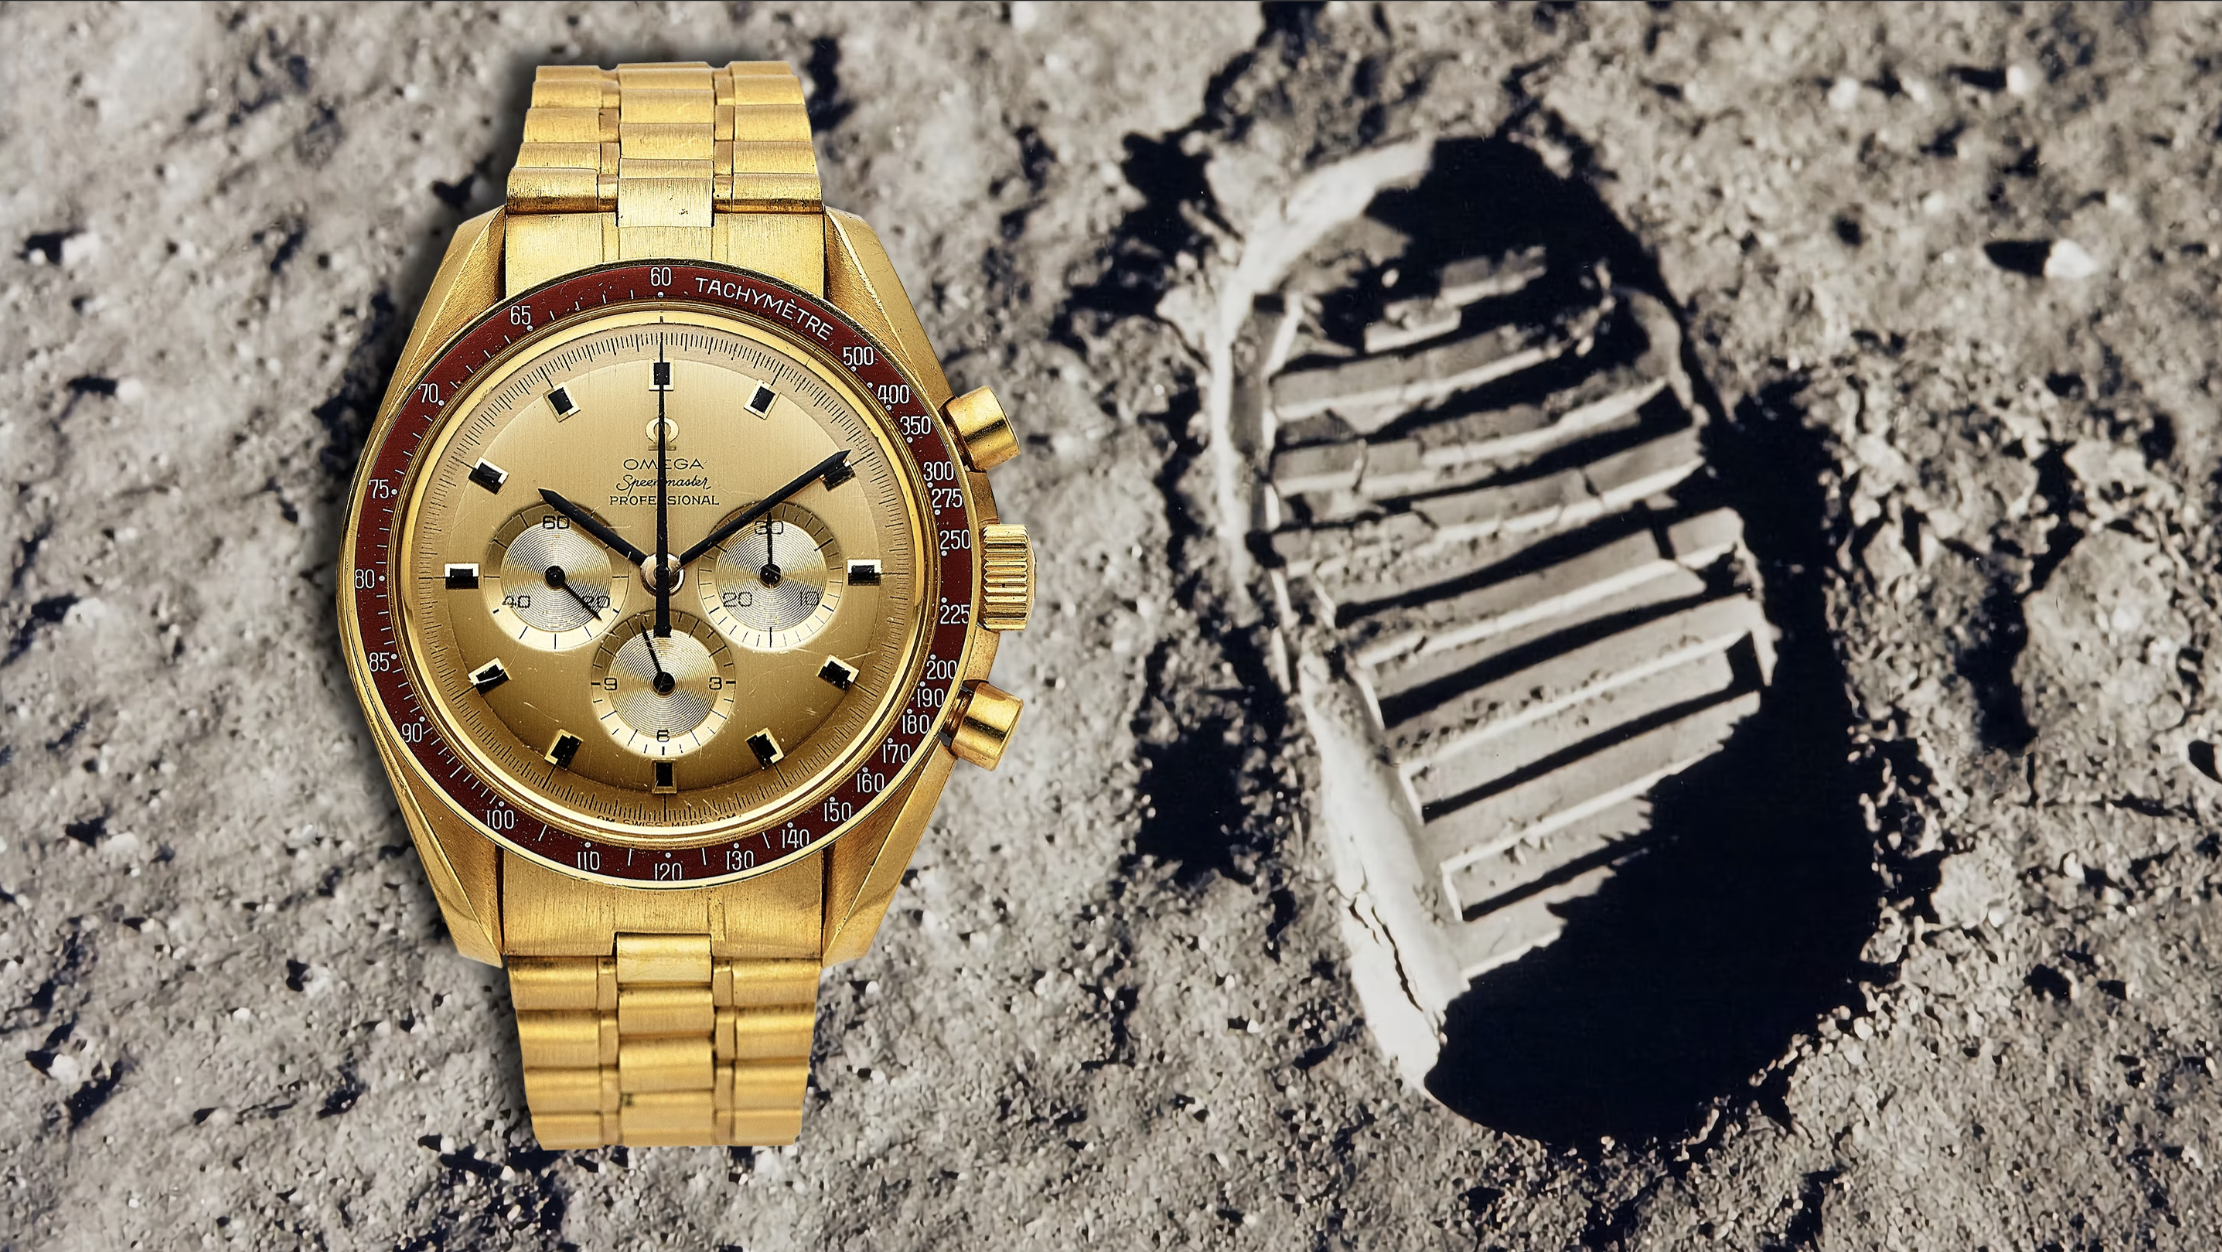 1969 Gold Omega Speedmaster Owned by Michael Collins Number 19 (Ref. 145.022 69)